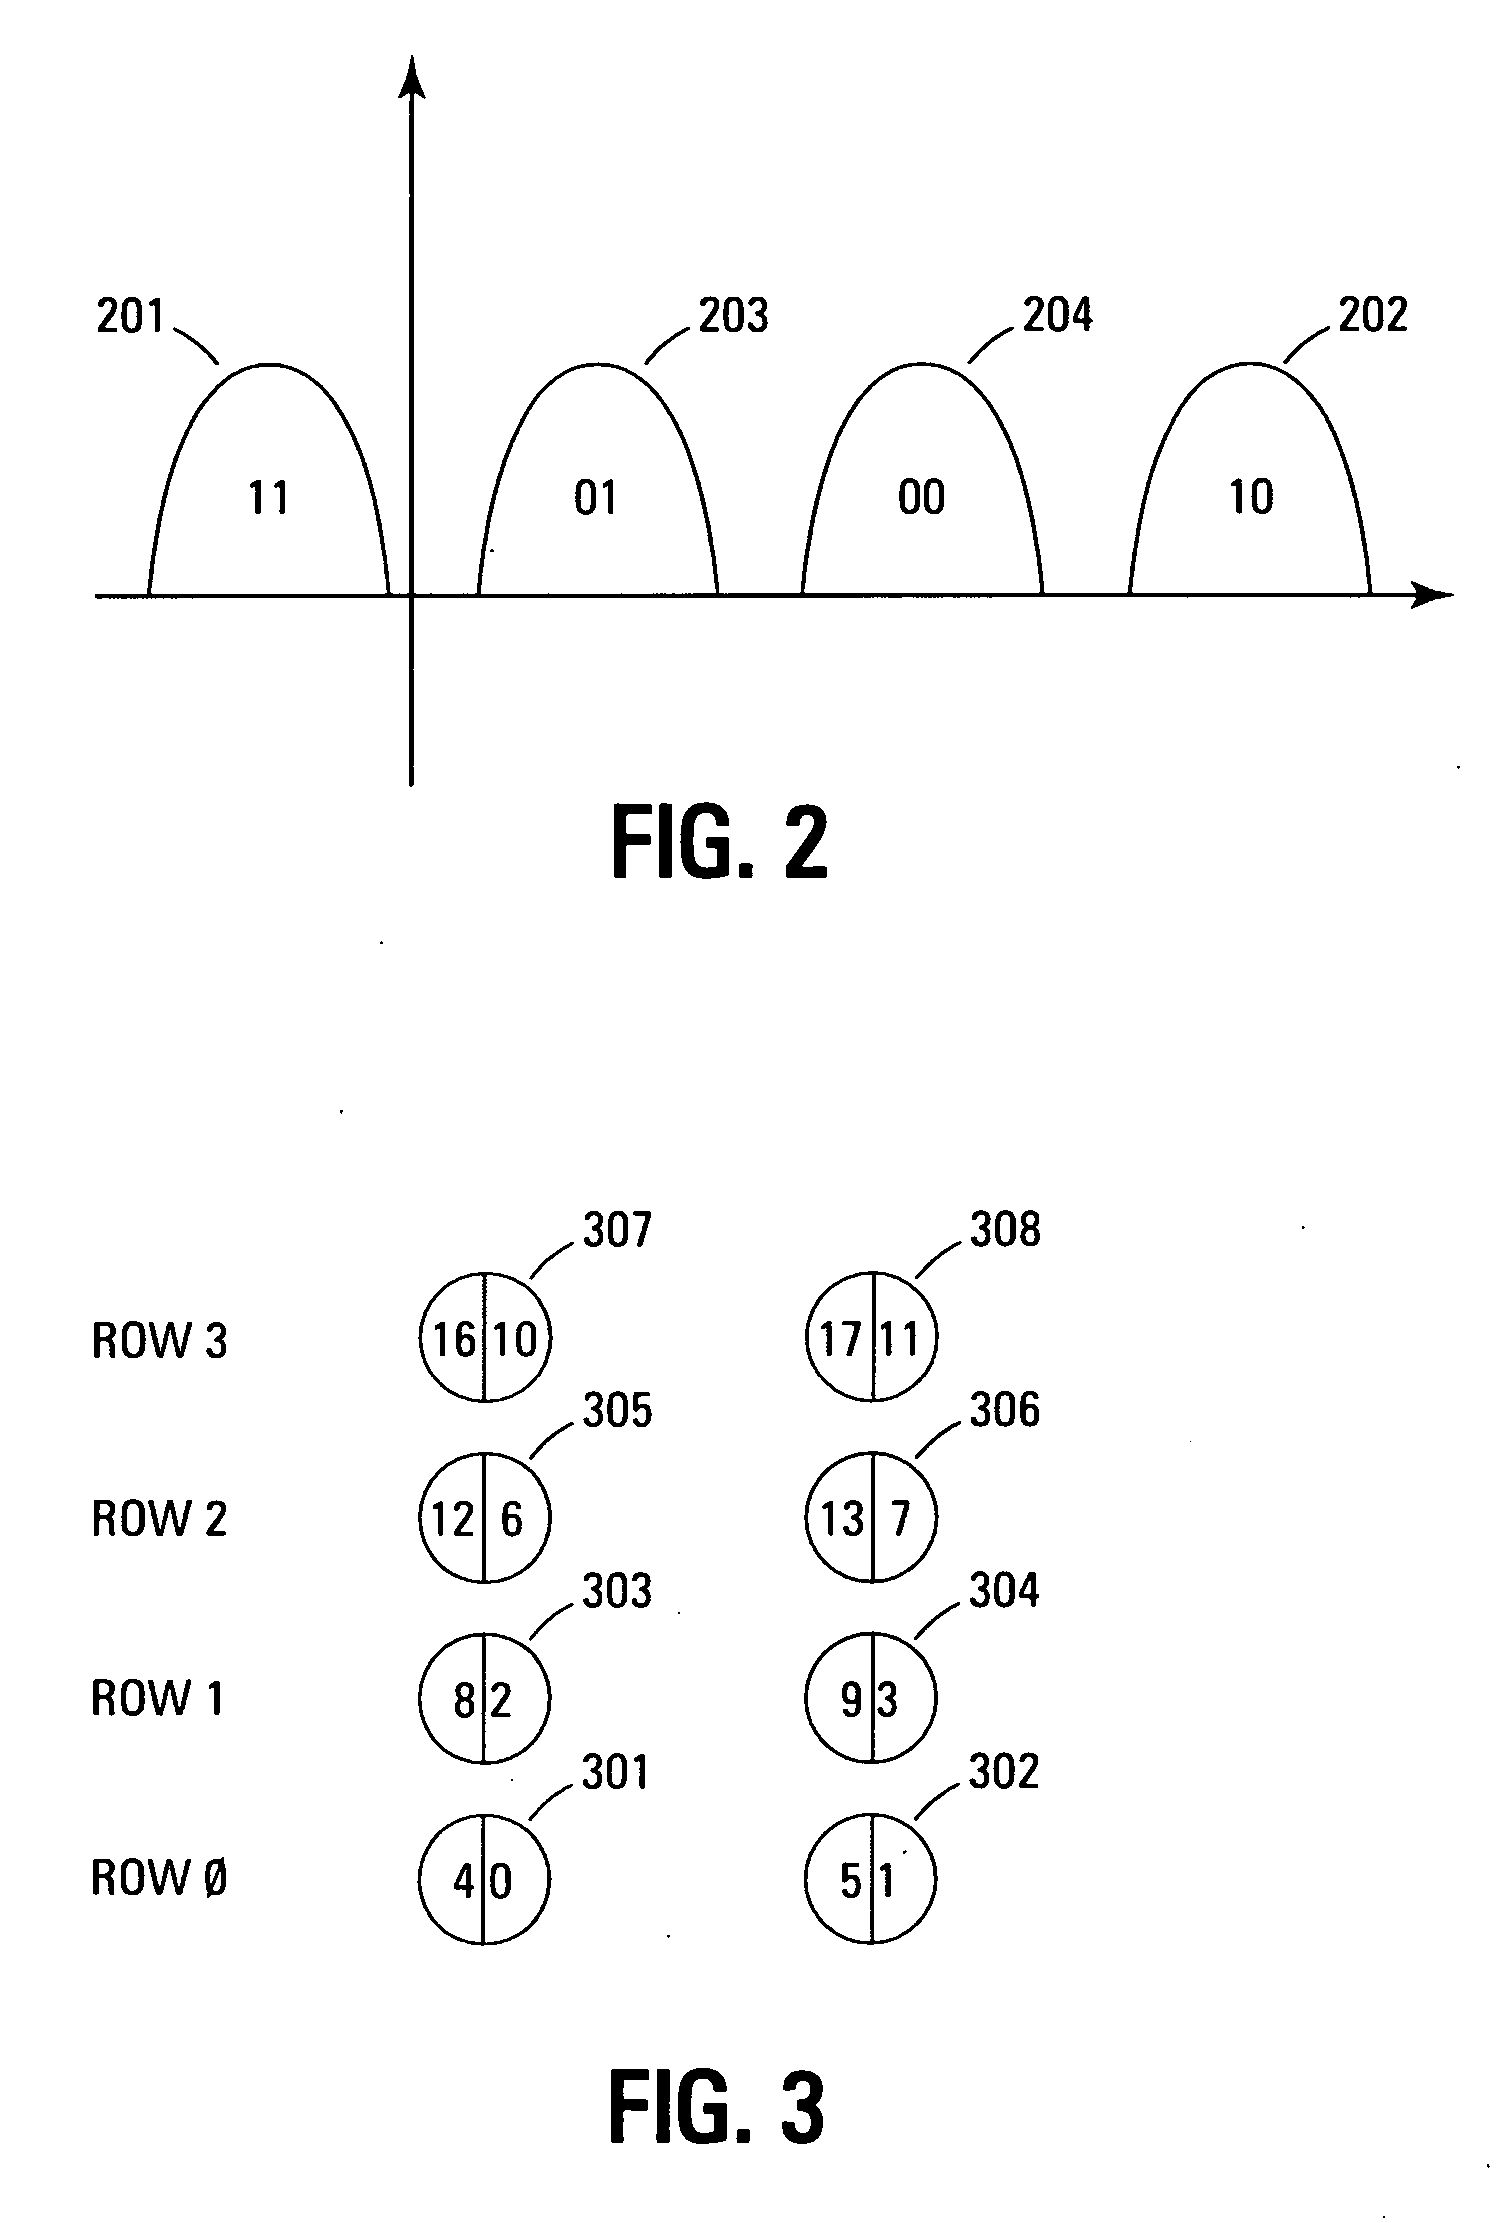 Single level cell programming in a multiple level cell non-volatile memory device